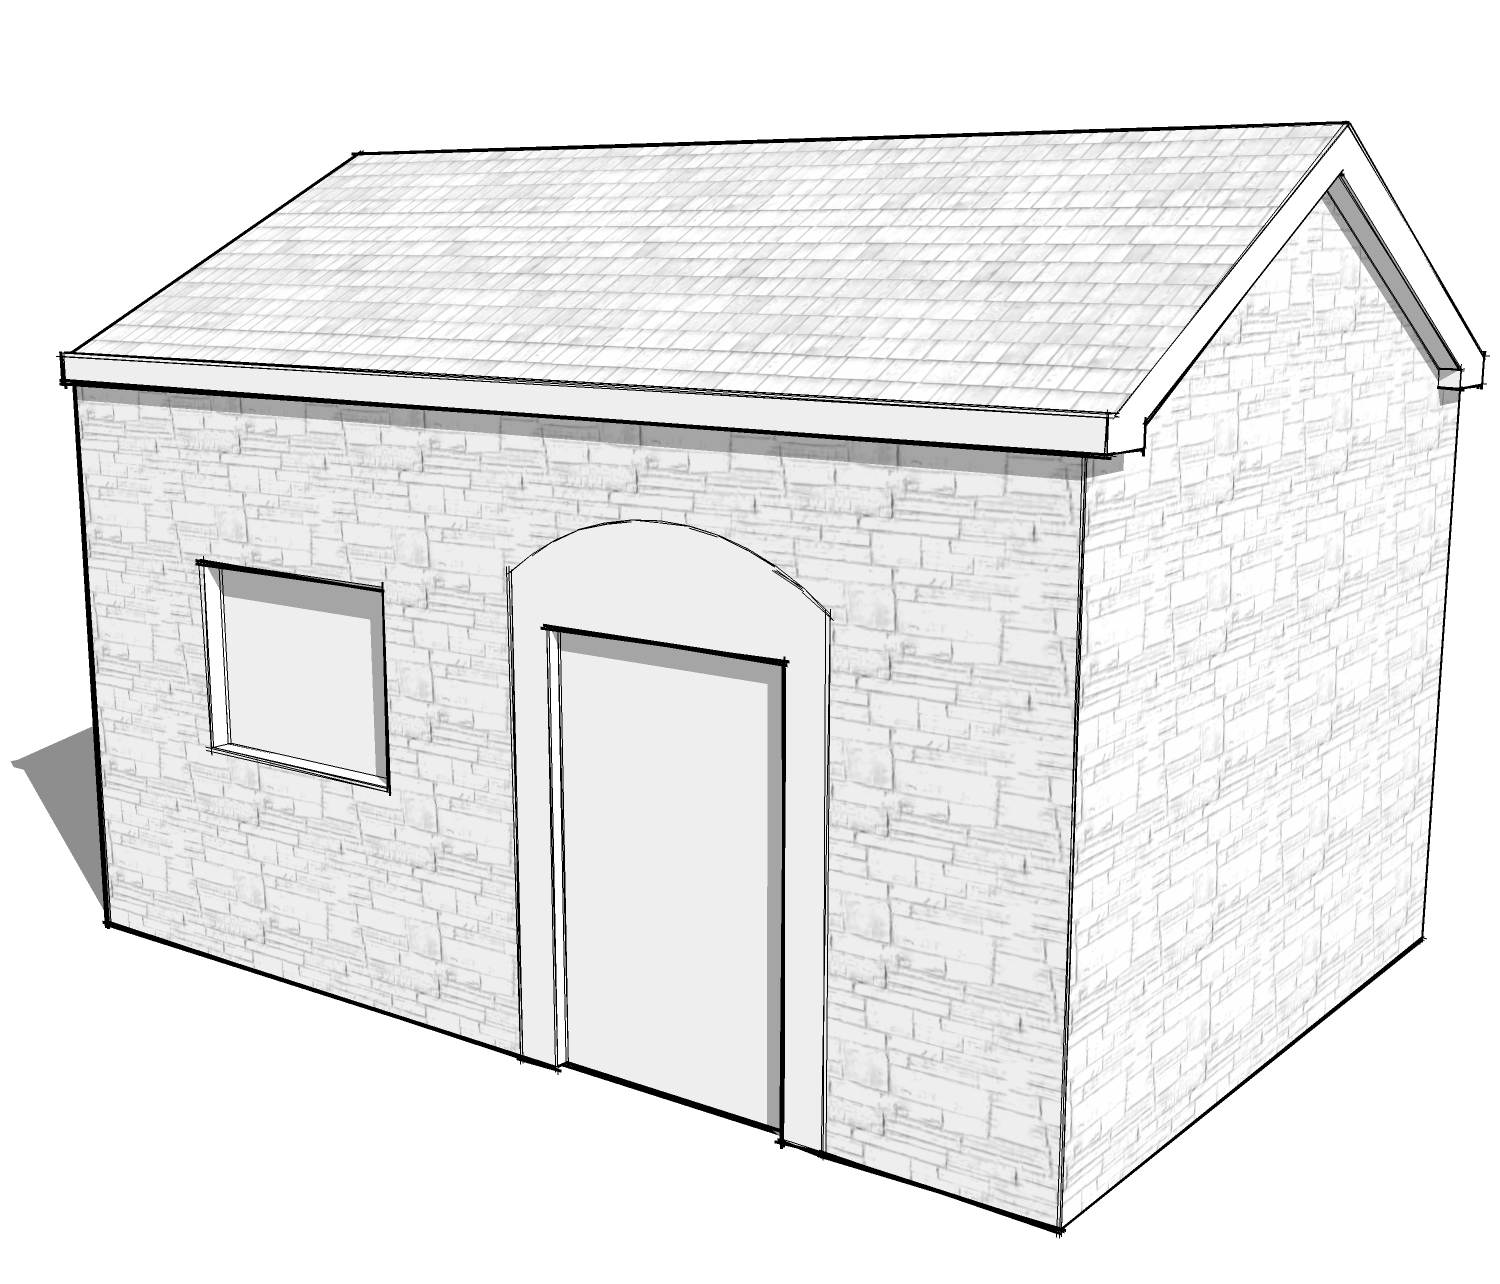 desaturated within SketchUp